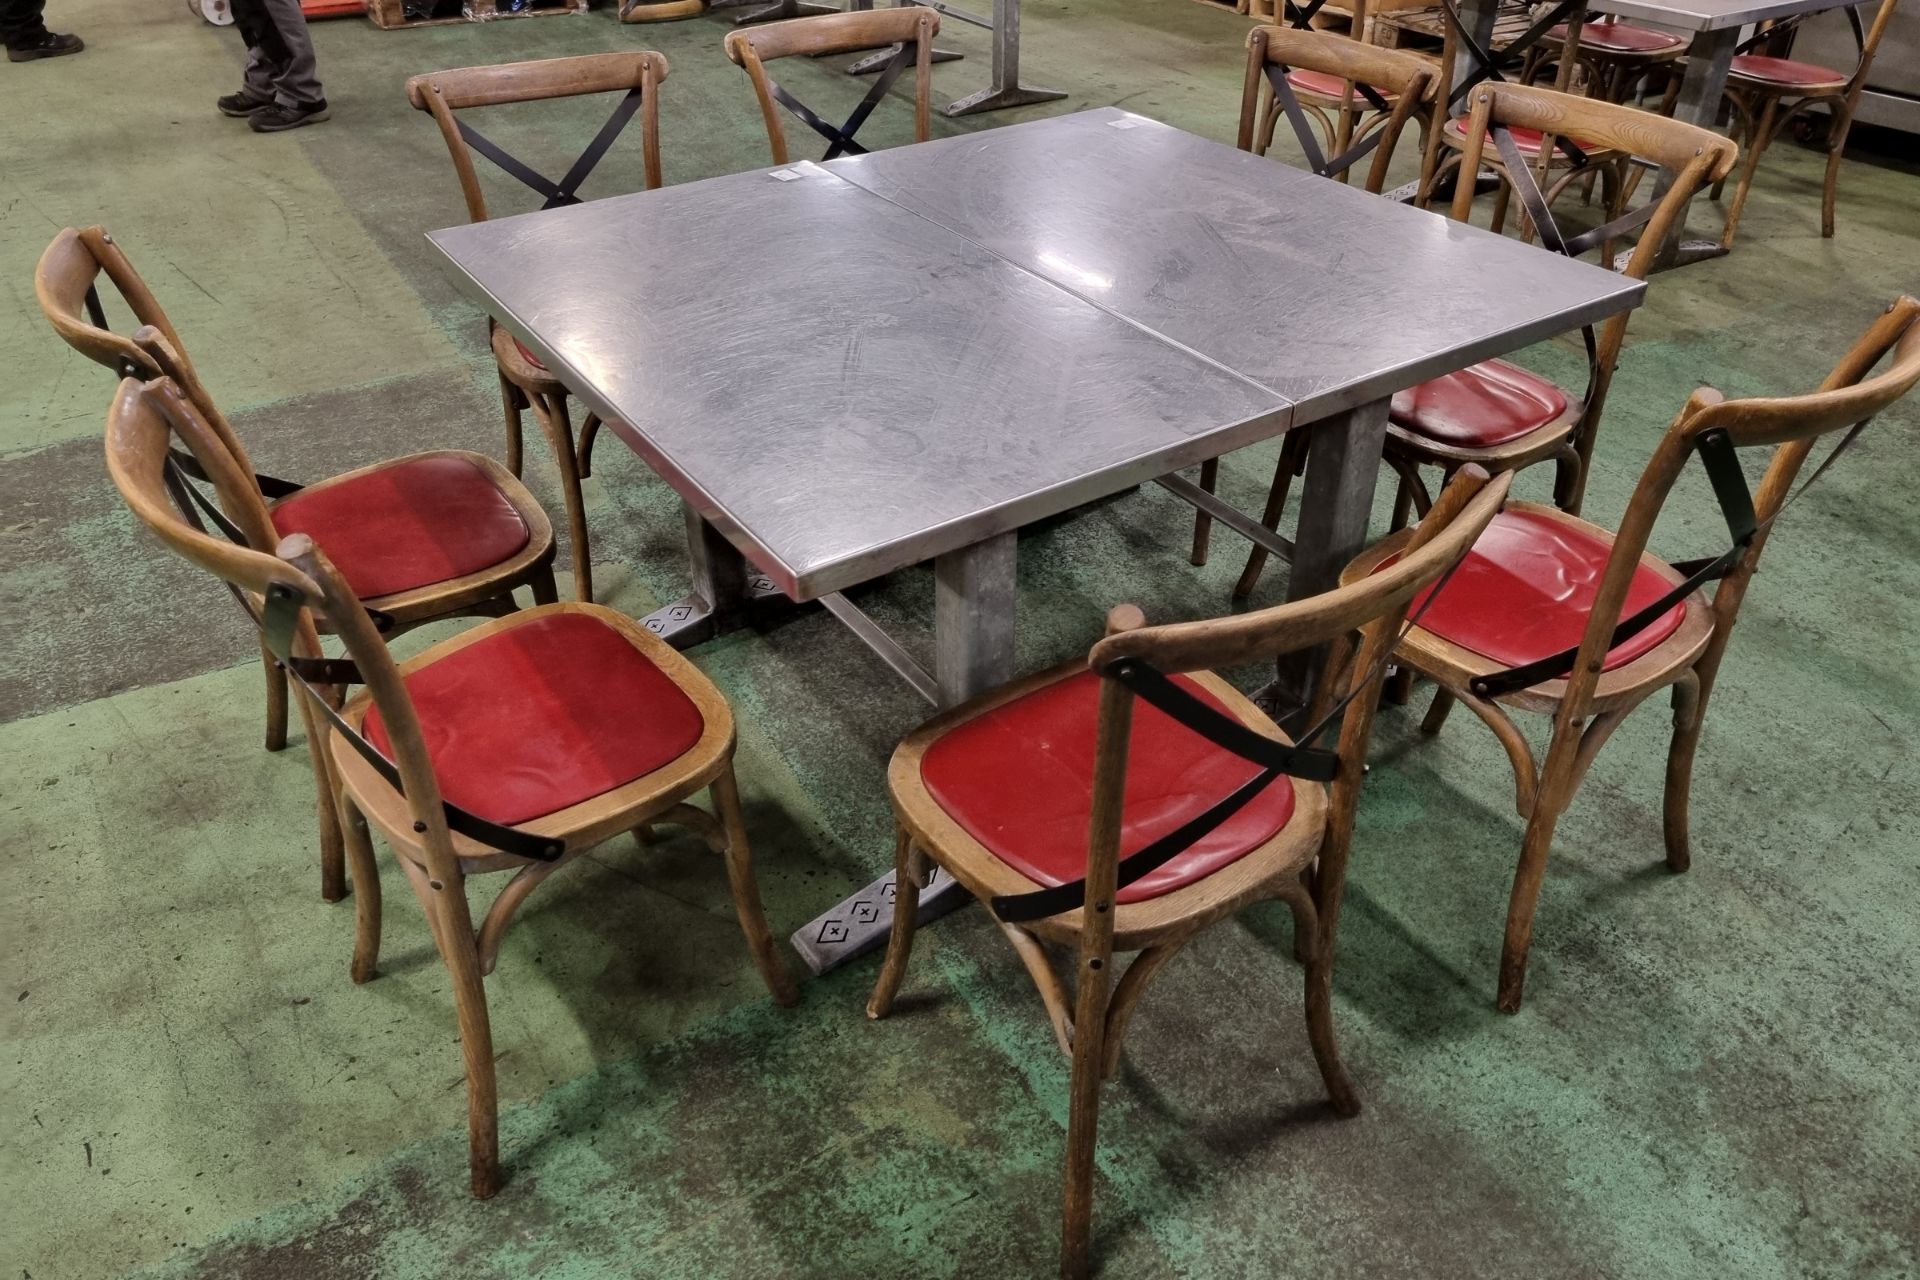 8x Wooden restaurant chairs, 2x Metal tables - W 1200 x D 690 x H 760 mm - Image 5 of 5